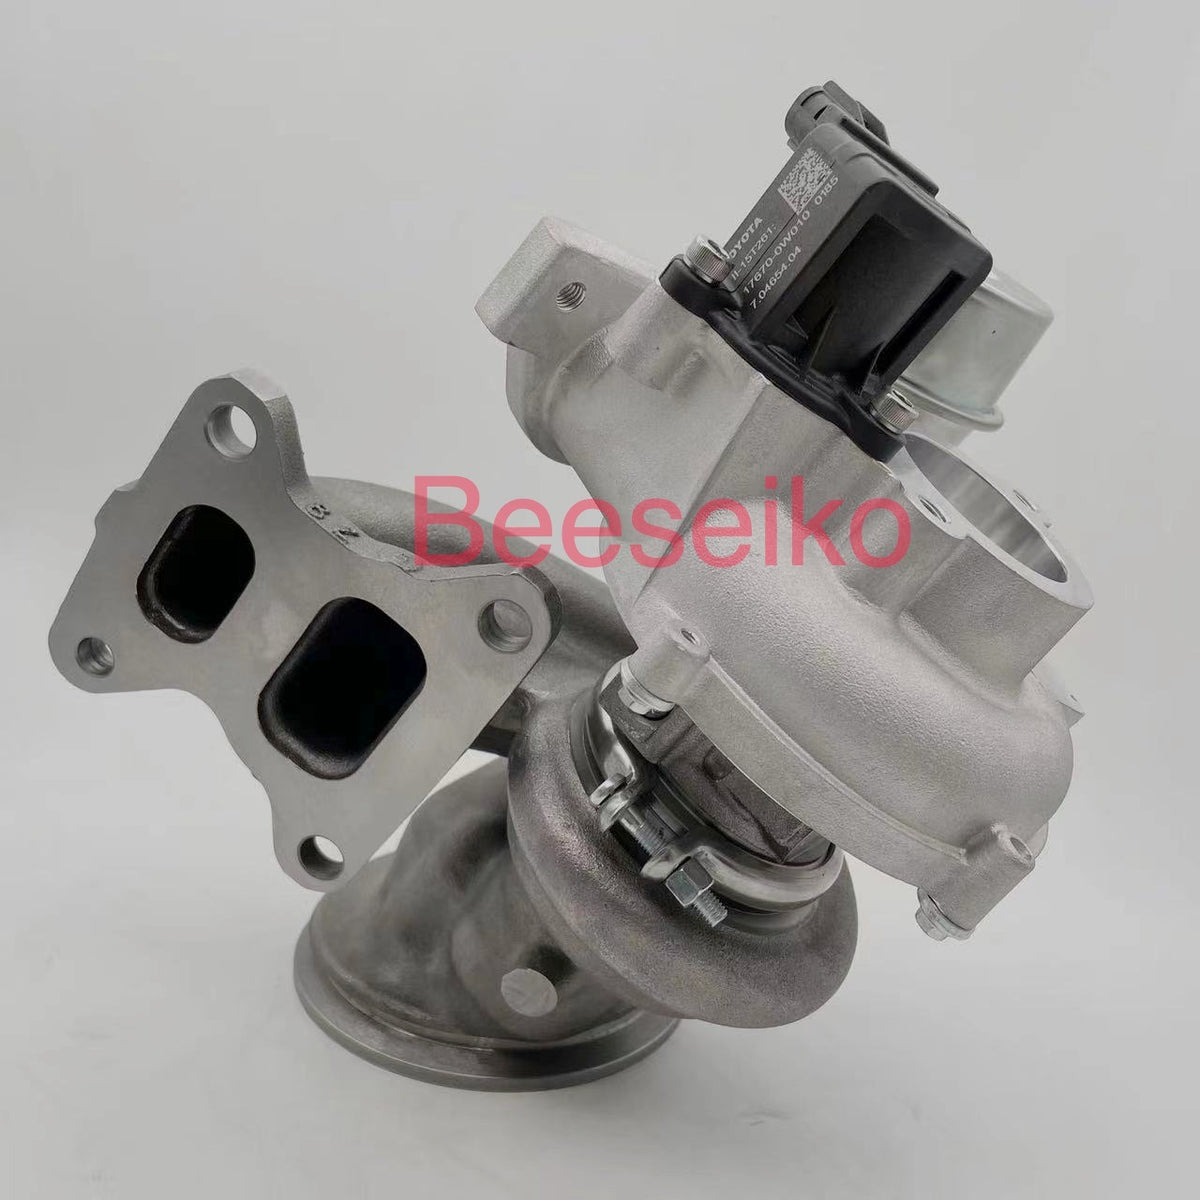 17201-36010 Turbocharger Assembly Fit For TOYOTA Highlander corona Lexus IS200T NX300